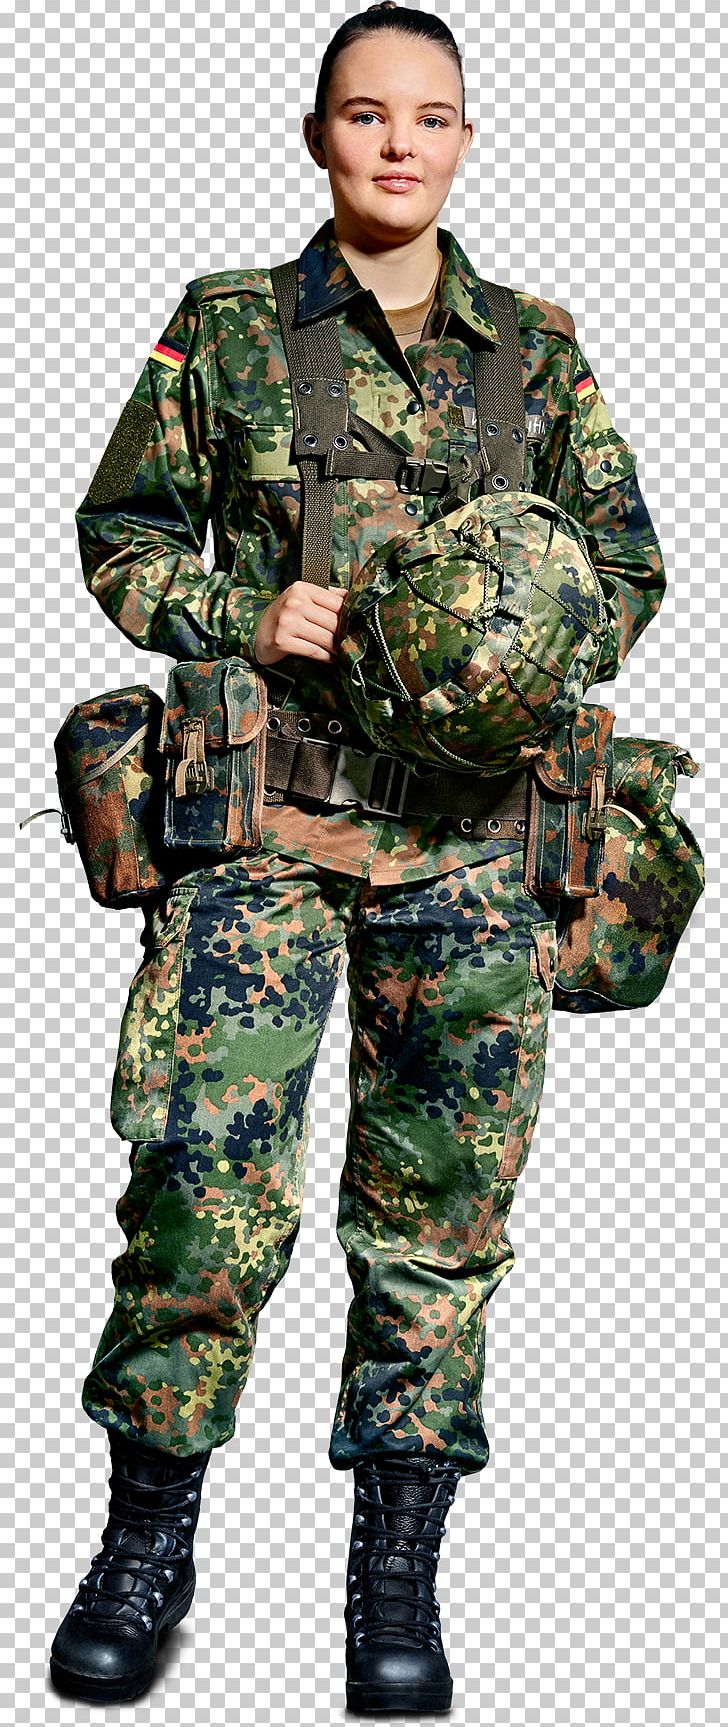 Soldier Die Rekruten Infantry Military Camouflage PNG, Clipart, Army, Army Officer, Bundeswehr, Camouflage, Clothing Free PNG Download